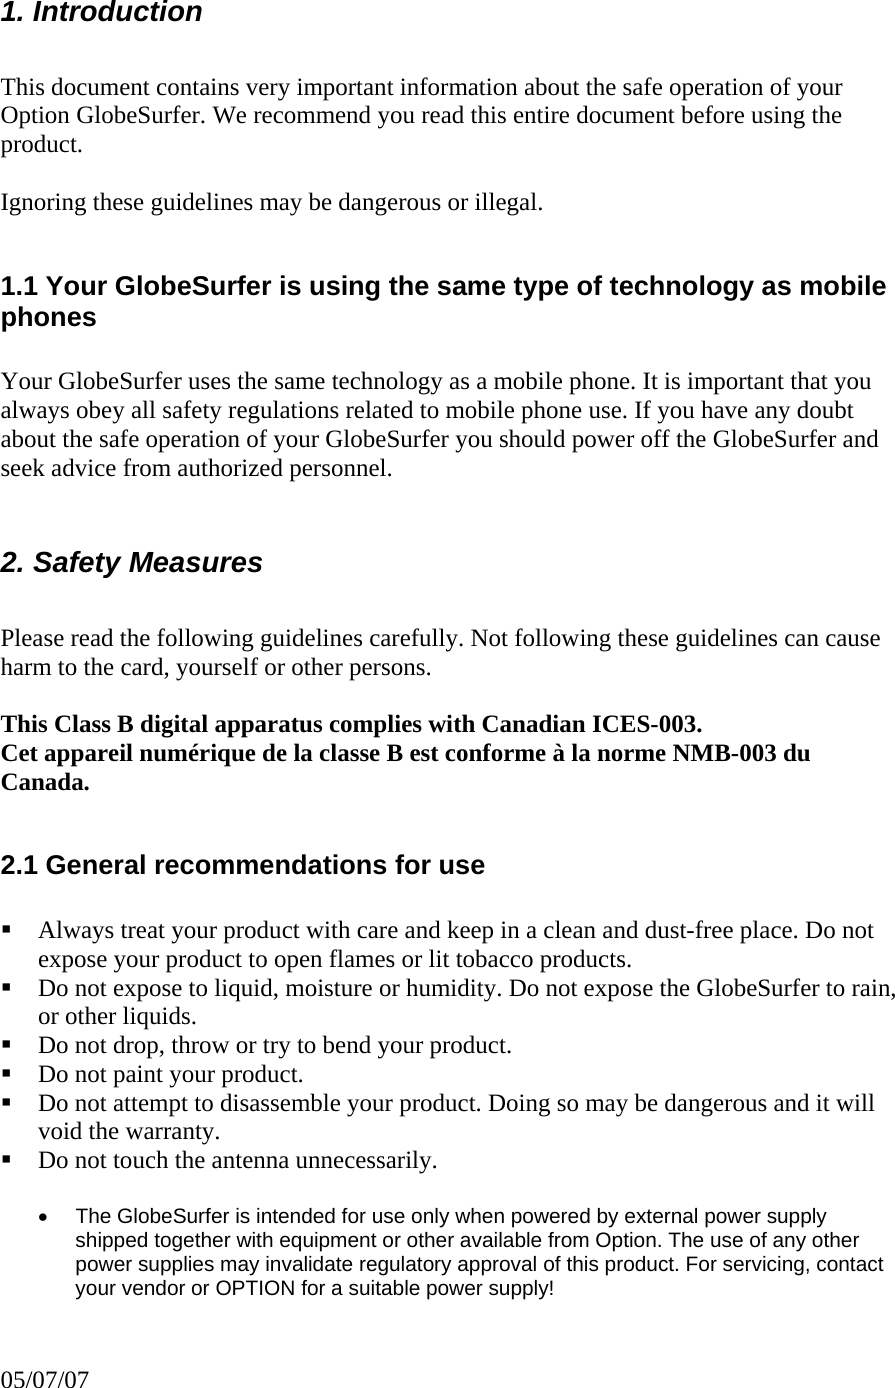     1. Introduction   This document contains very important information about the safe operation of your Option GlobeSurfer. We recommend you read this entire document before using the product.    Ignoring these guidelines may be dangerous or illegal.   1.1 Your GlobeSurfer is using the same type of technology as mobile phones  Your GlobeSurfer uses the same technology as a mobile phone. It is important that you always obey all safety regulations related to mobile phone use. If you have any doubt about the safe operation of your GlobeSurfer you should power off the GlobeSurfer and seek advice from authorized personnel.  2. Safety Measures   Please read the following guidelines carefully. Not following these guidelines can cause harm to the card, yourself or other persons.   This Class B digital apparatus complies with Canadian ICES-003. Cet appareil numérique de la classe B est conforme à la norme NMB-003 du Canada.  2.1 General recommendations for use    Always treat your product with care and keep in a clean and dust-free place. Do not expose your product to open flames or lit tobacco products.   Do not expose to liquid, moisture or humidity. Do not expose the GlobeSurfer to rain, or other liquids.   Do not drop, throw or try to bend your product.   Do not paint your product.   Do not attempt to disassemble your product. Doing so may be dangerous and it will void the warranty.   Do not touch the antenna unnecessarily.   •  The GlobeSurfer is intended for use only when powered by external power supply shipped together with equipment or other available from Option. The use of any other power supplies may invalidate regulatory approval of this product. For servicing, contact your vendor or OPTION for a suitable power supply! 05/07/07 